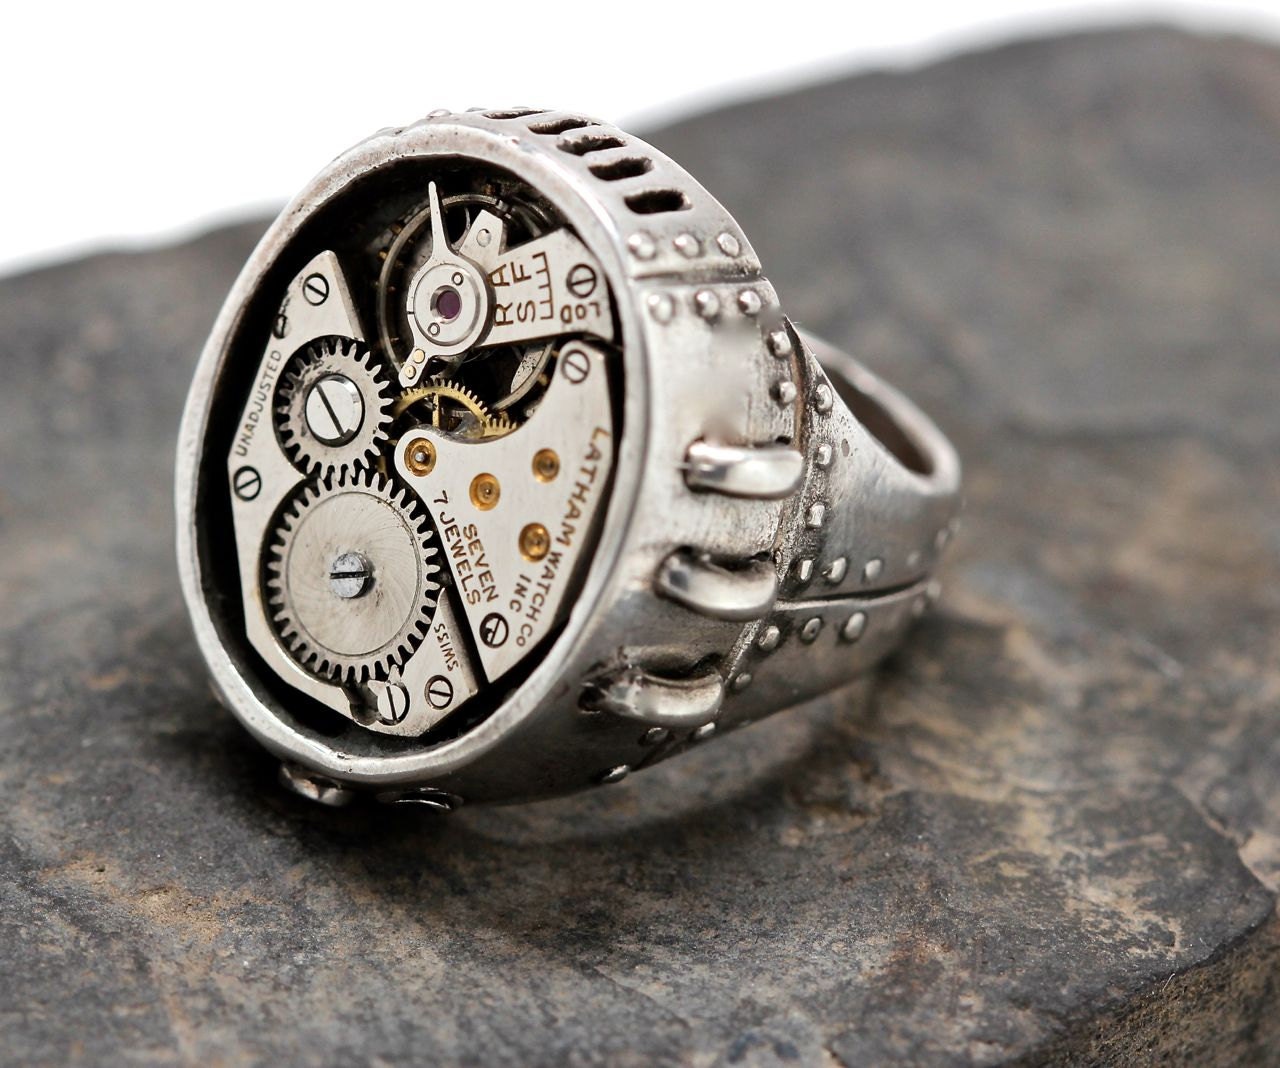 Steampunk ring Watch Part Ring Sterling Silver  sizes 4 to 13 - billyblue22